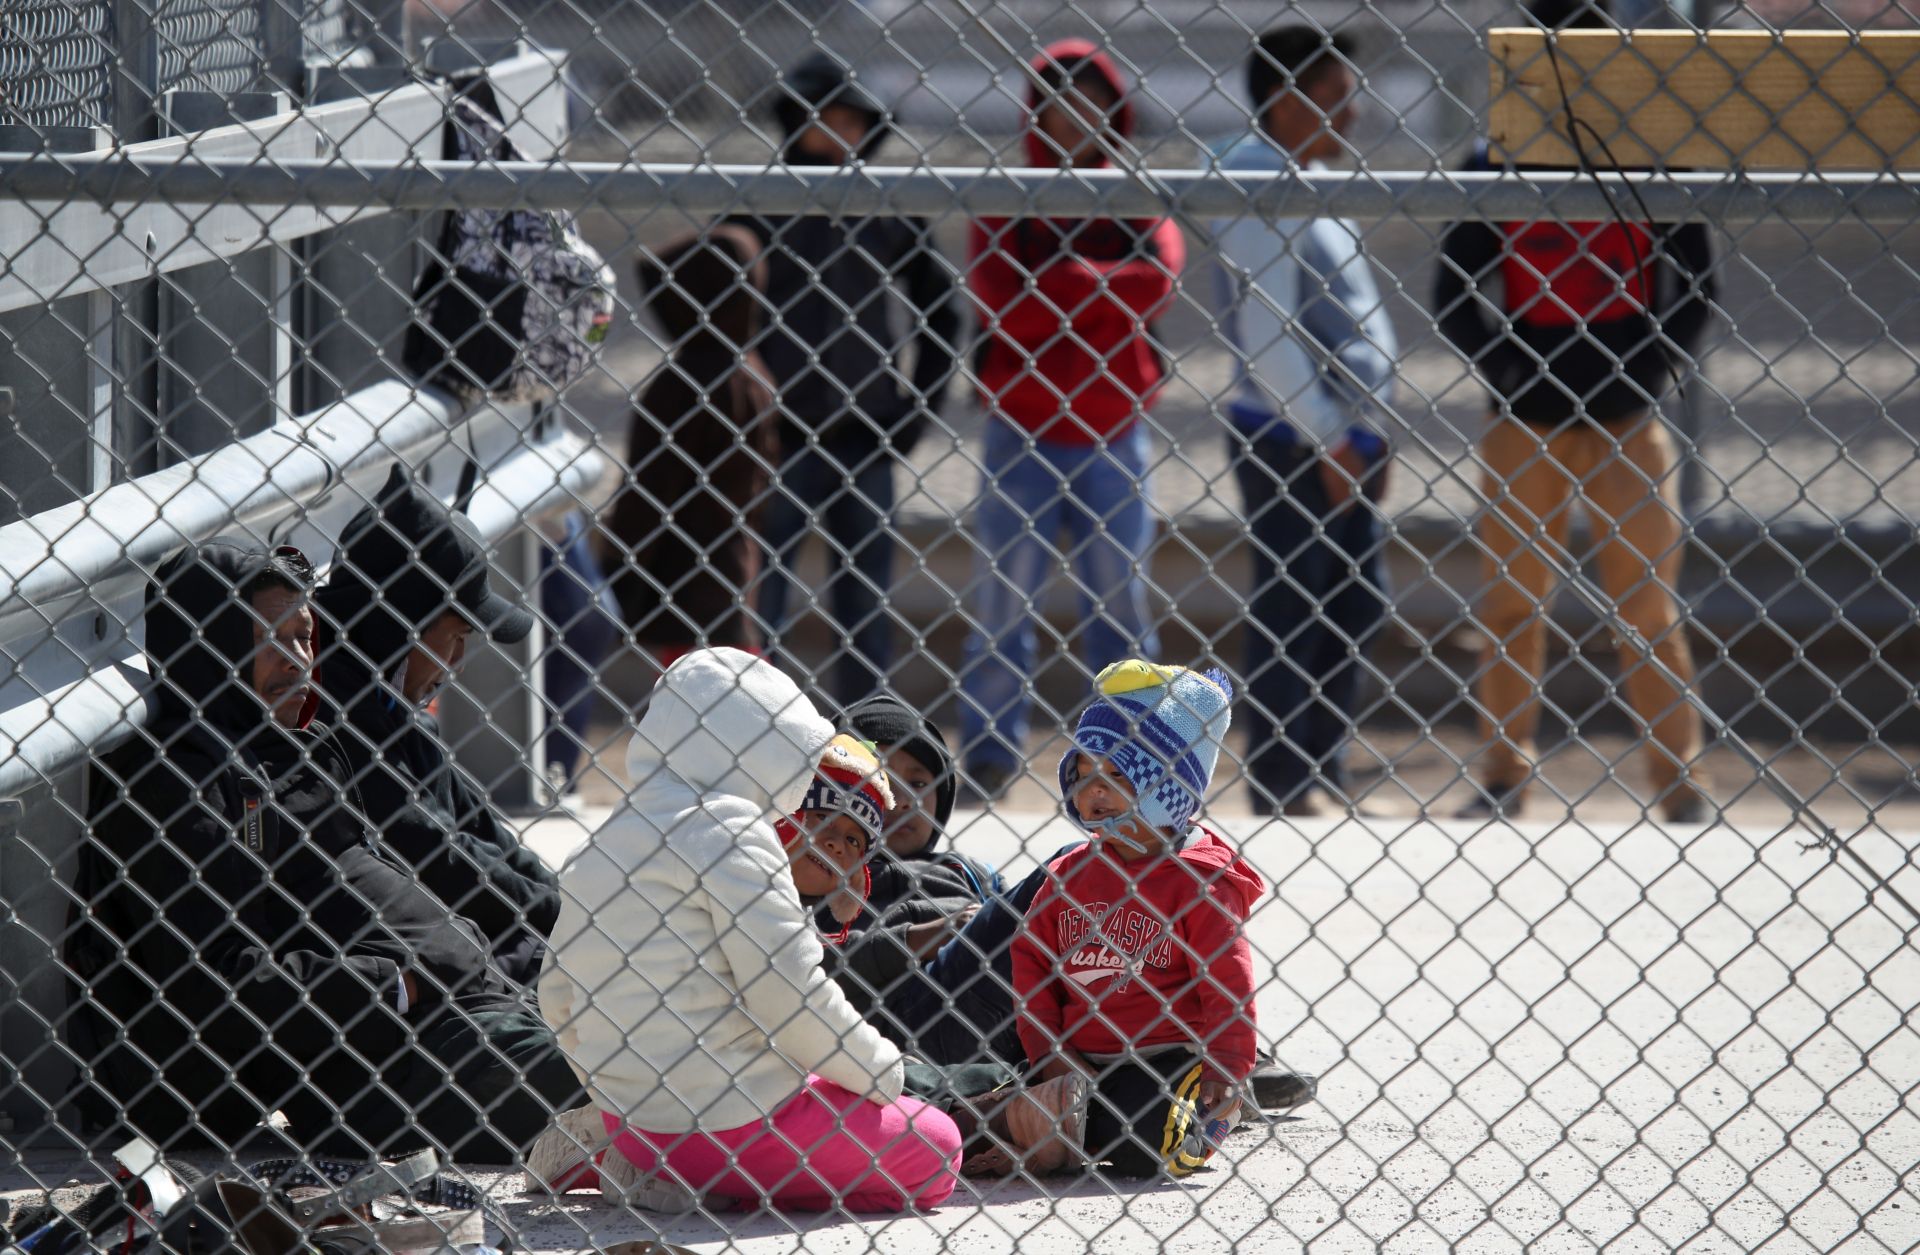 Migrants wait in a detention area on March 31, 2019, in El Paso, Texas.